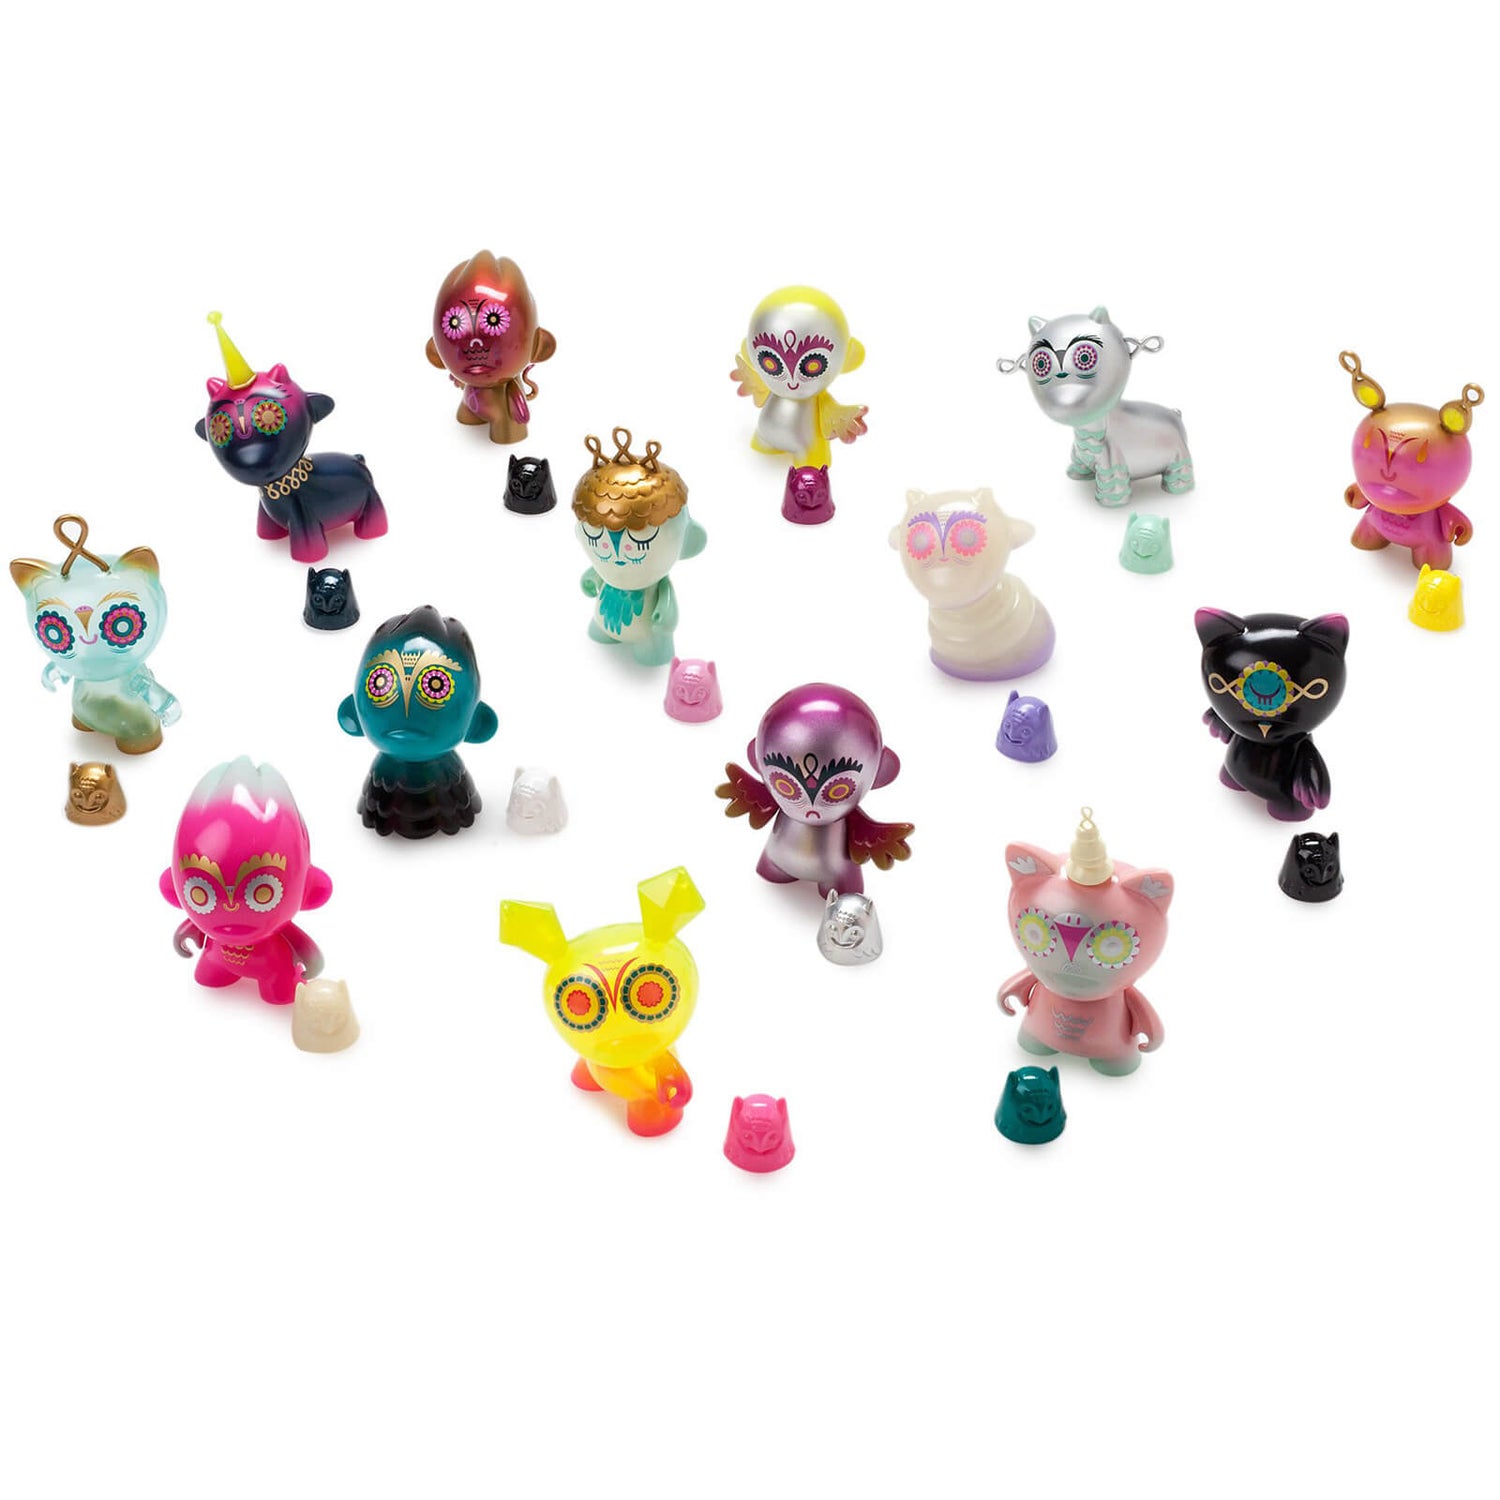 Kidrobot Nightriders 3 Inch Mini-Figures by Nathan Jurevicious Blind Box Assortment